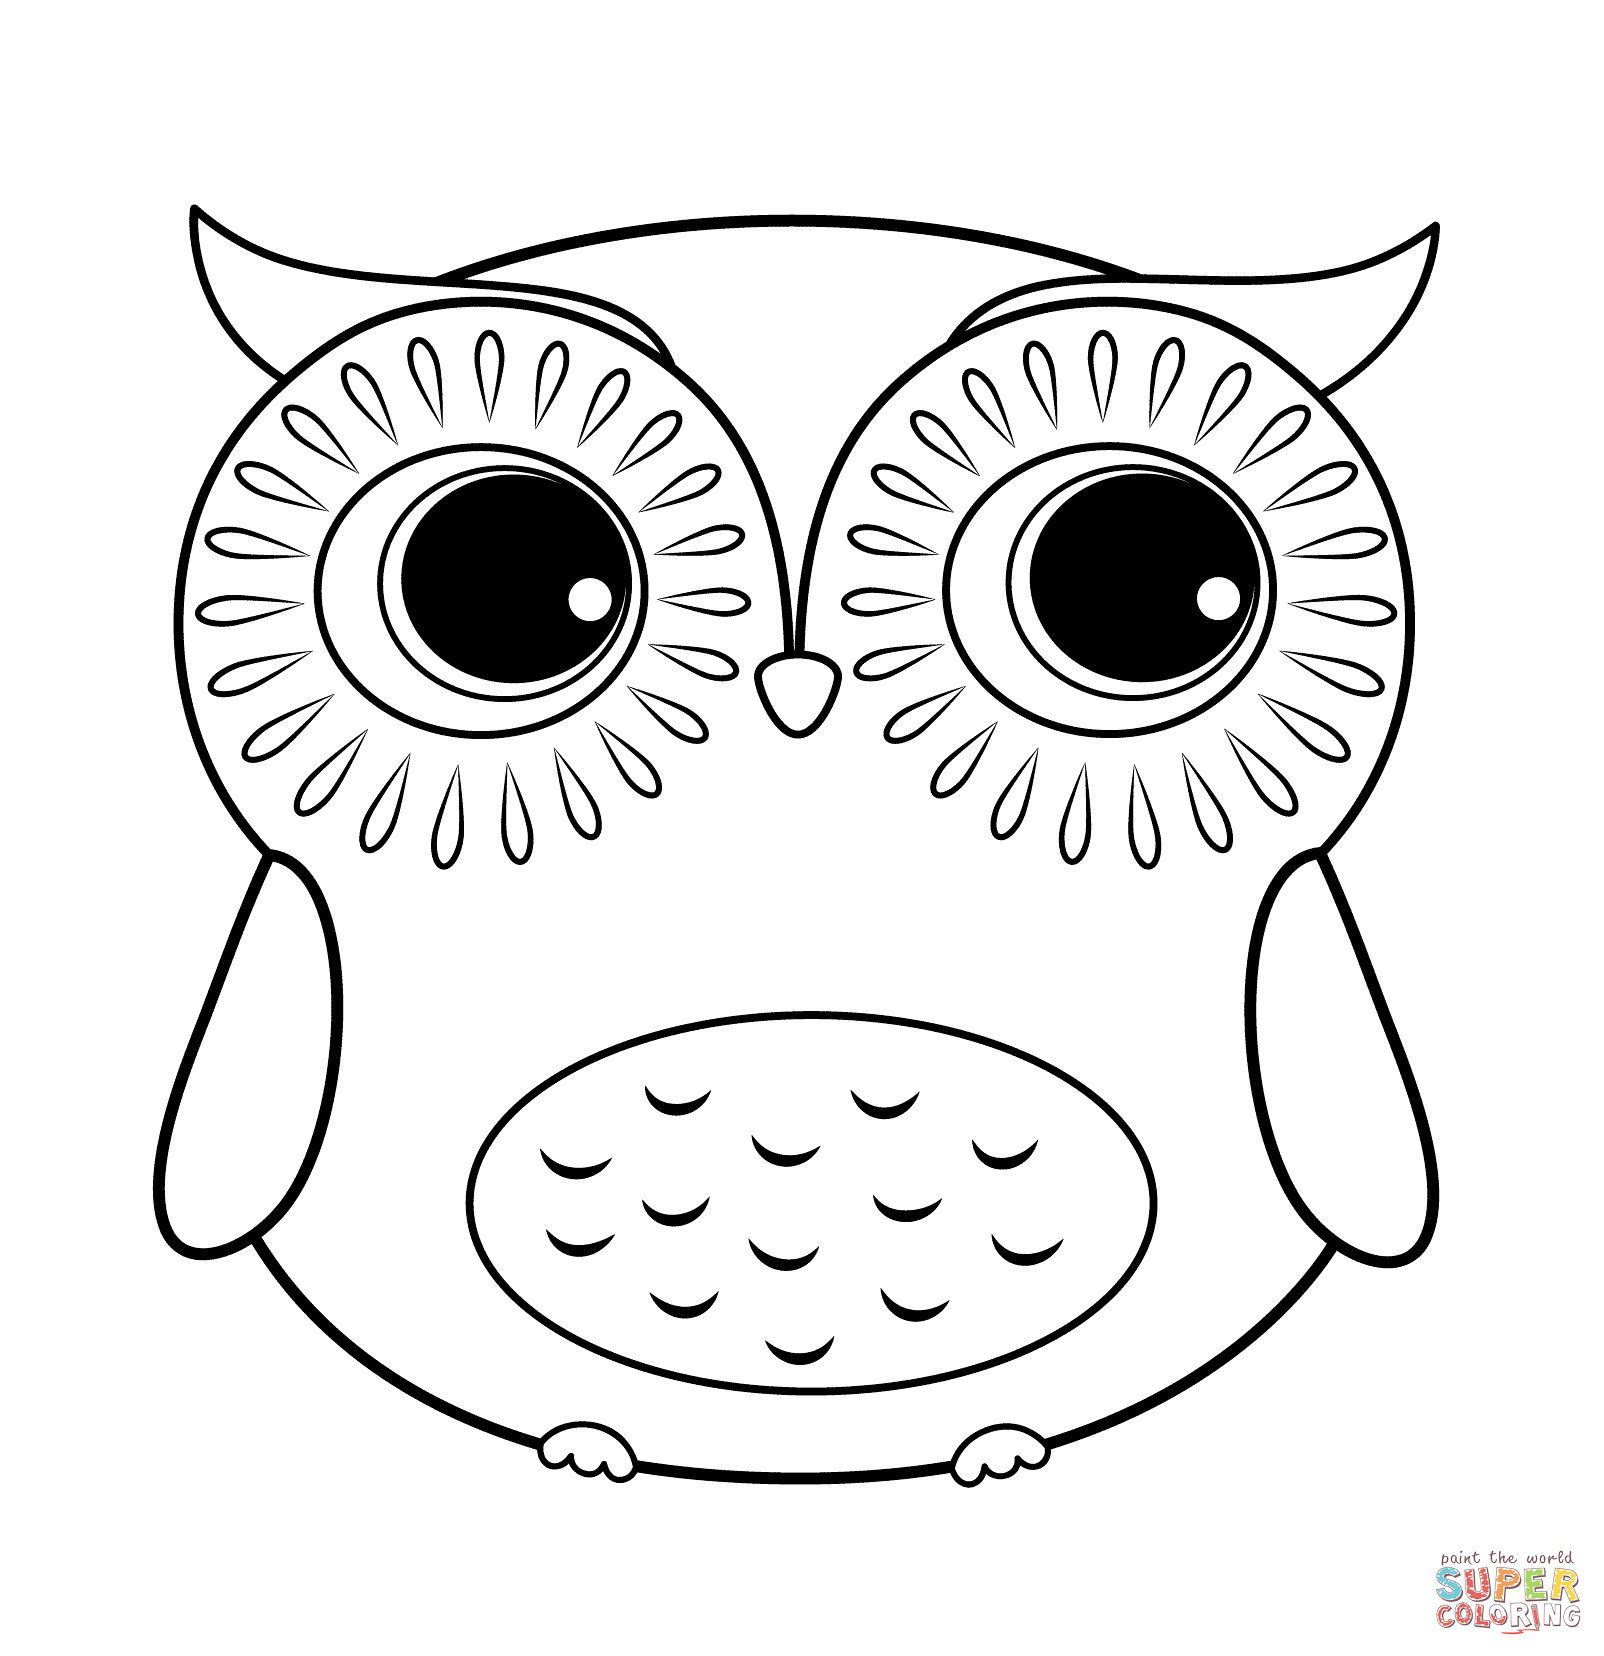 Owl Coloring Sheet
 Cartoon Owl coloring page